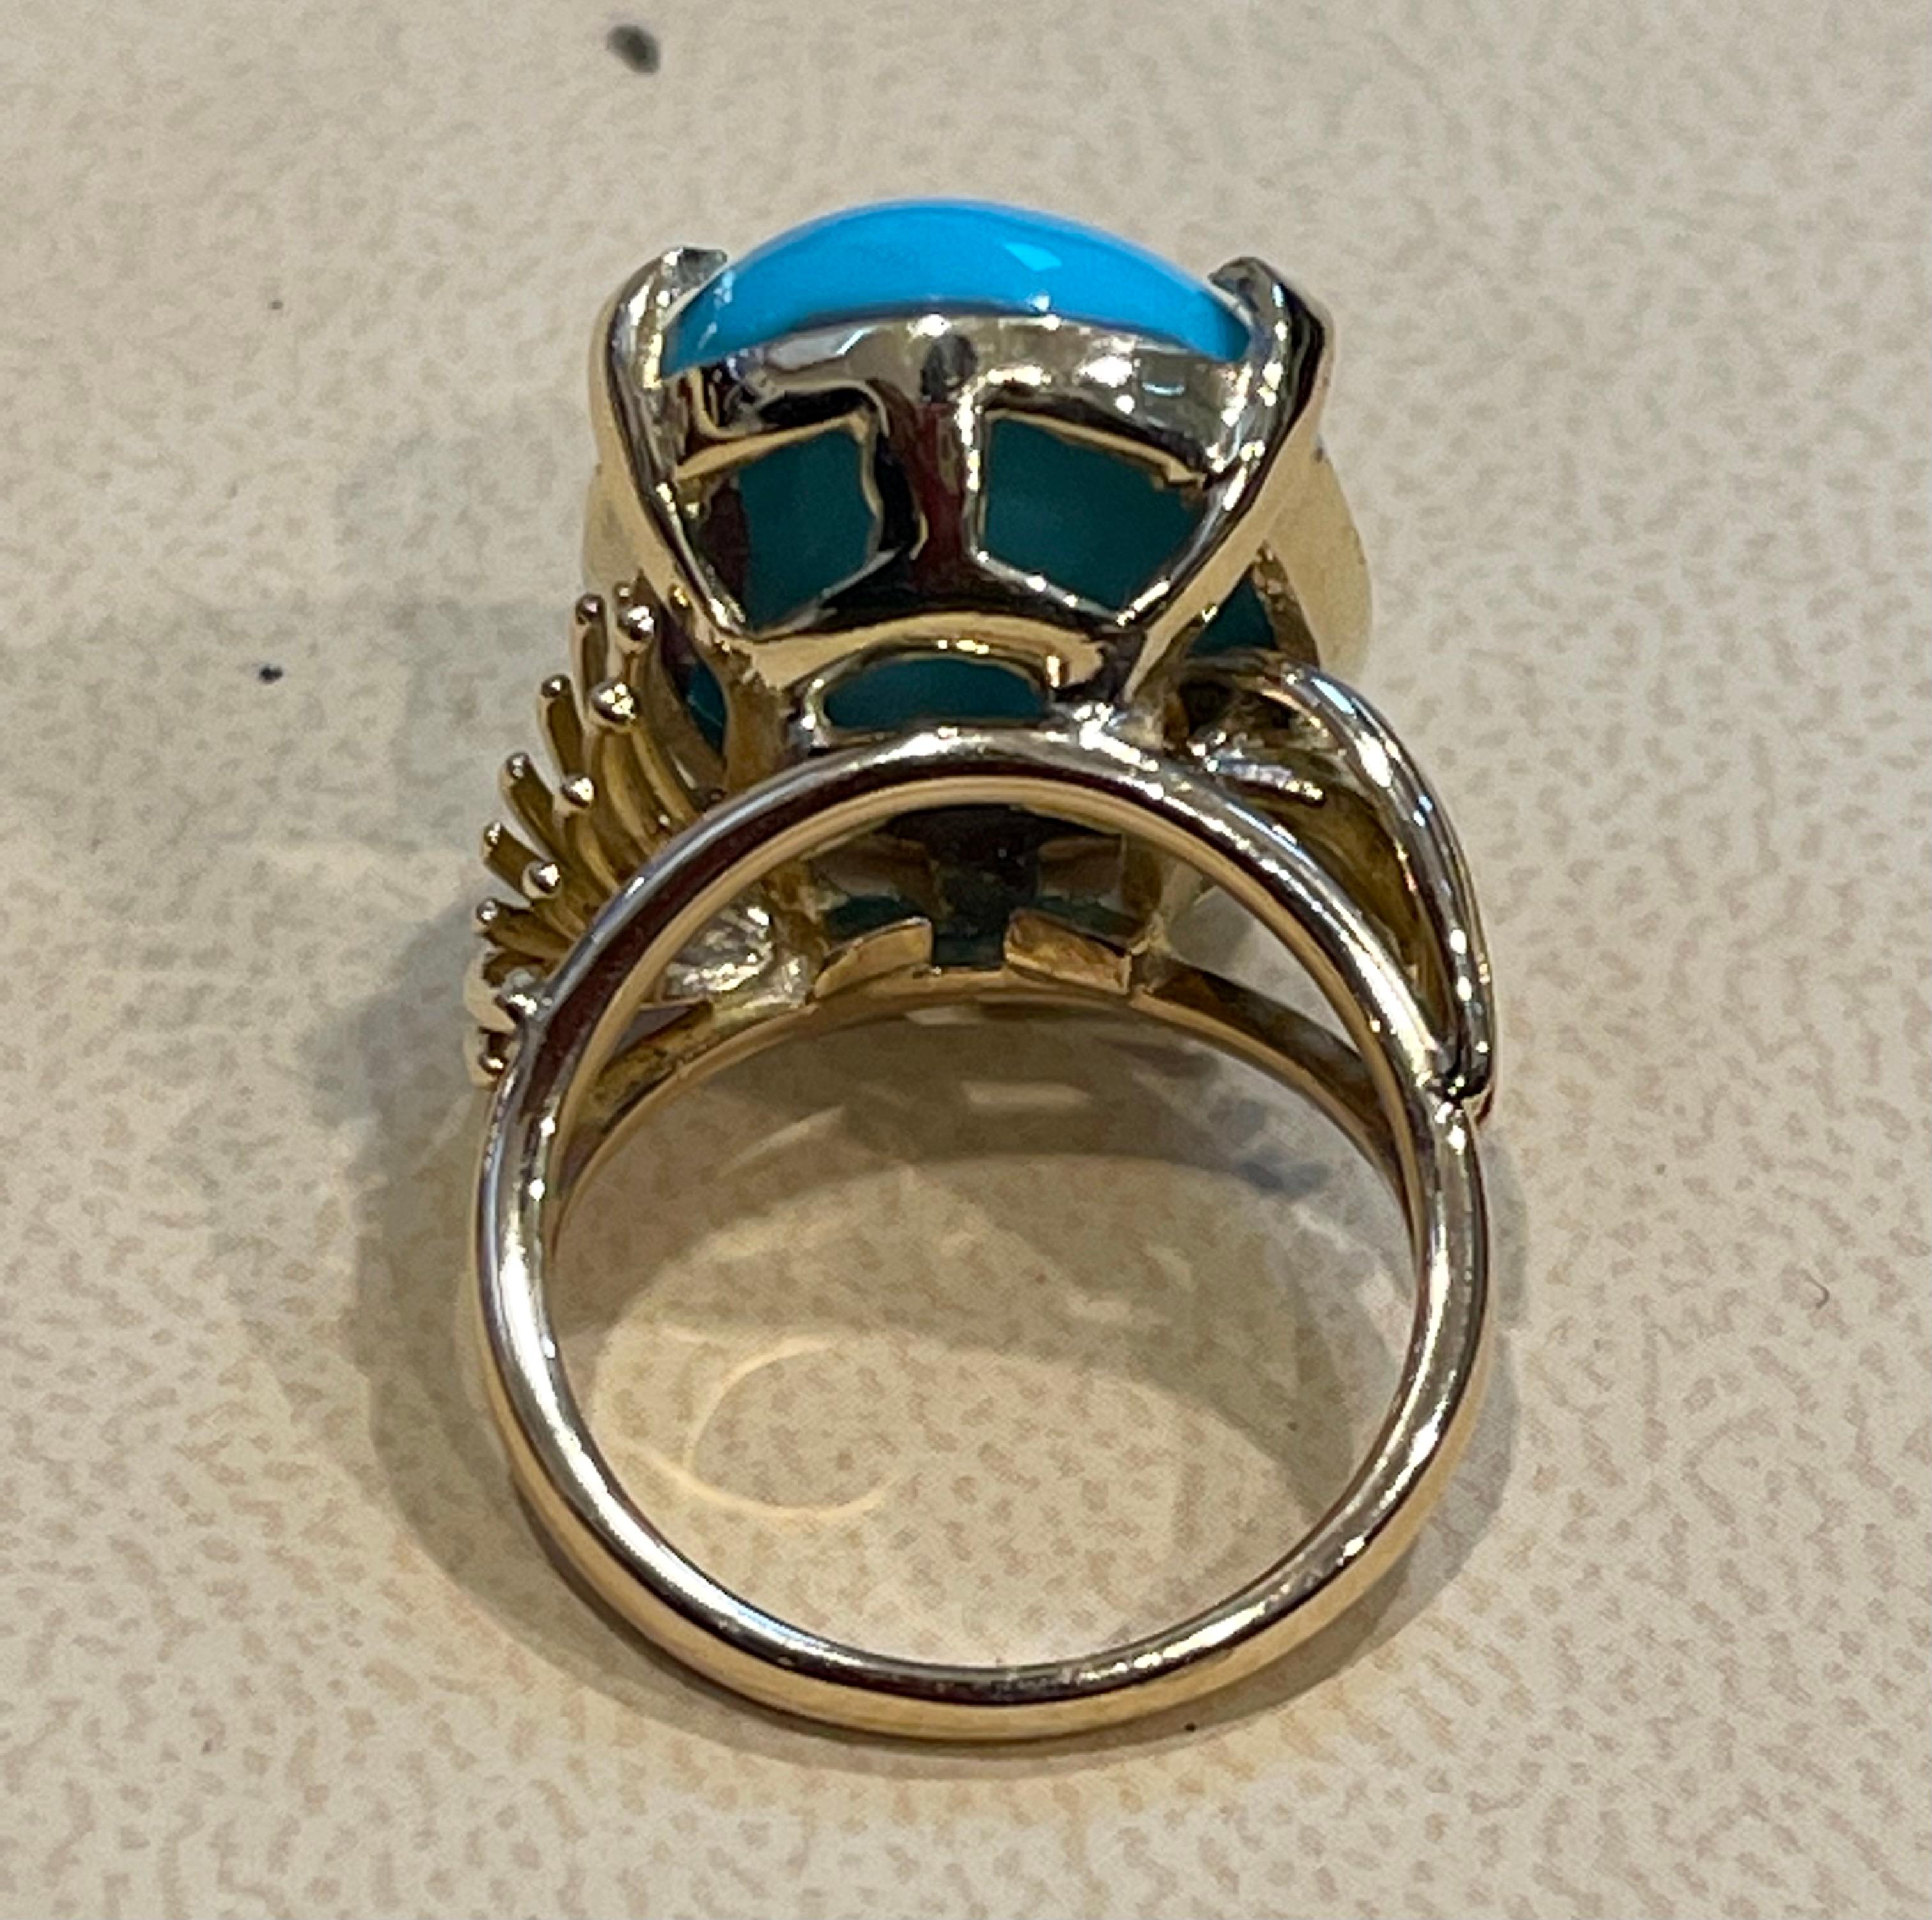 Vintage 12 Ct Natural Oval Sleeping Beauty Turquoise Ring, 14 Kt Yellow Gold For Sale 2